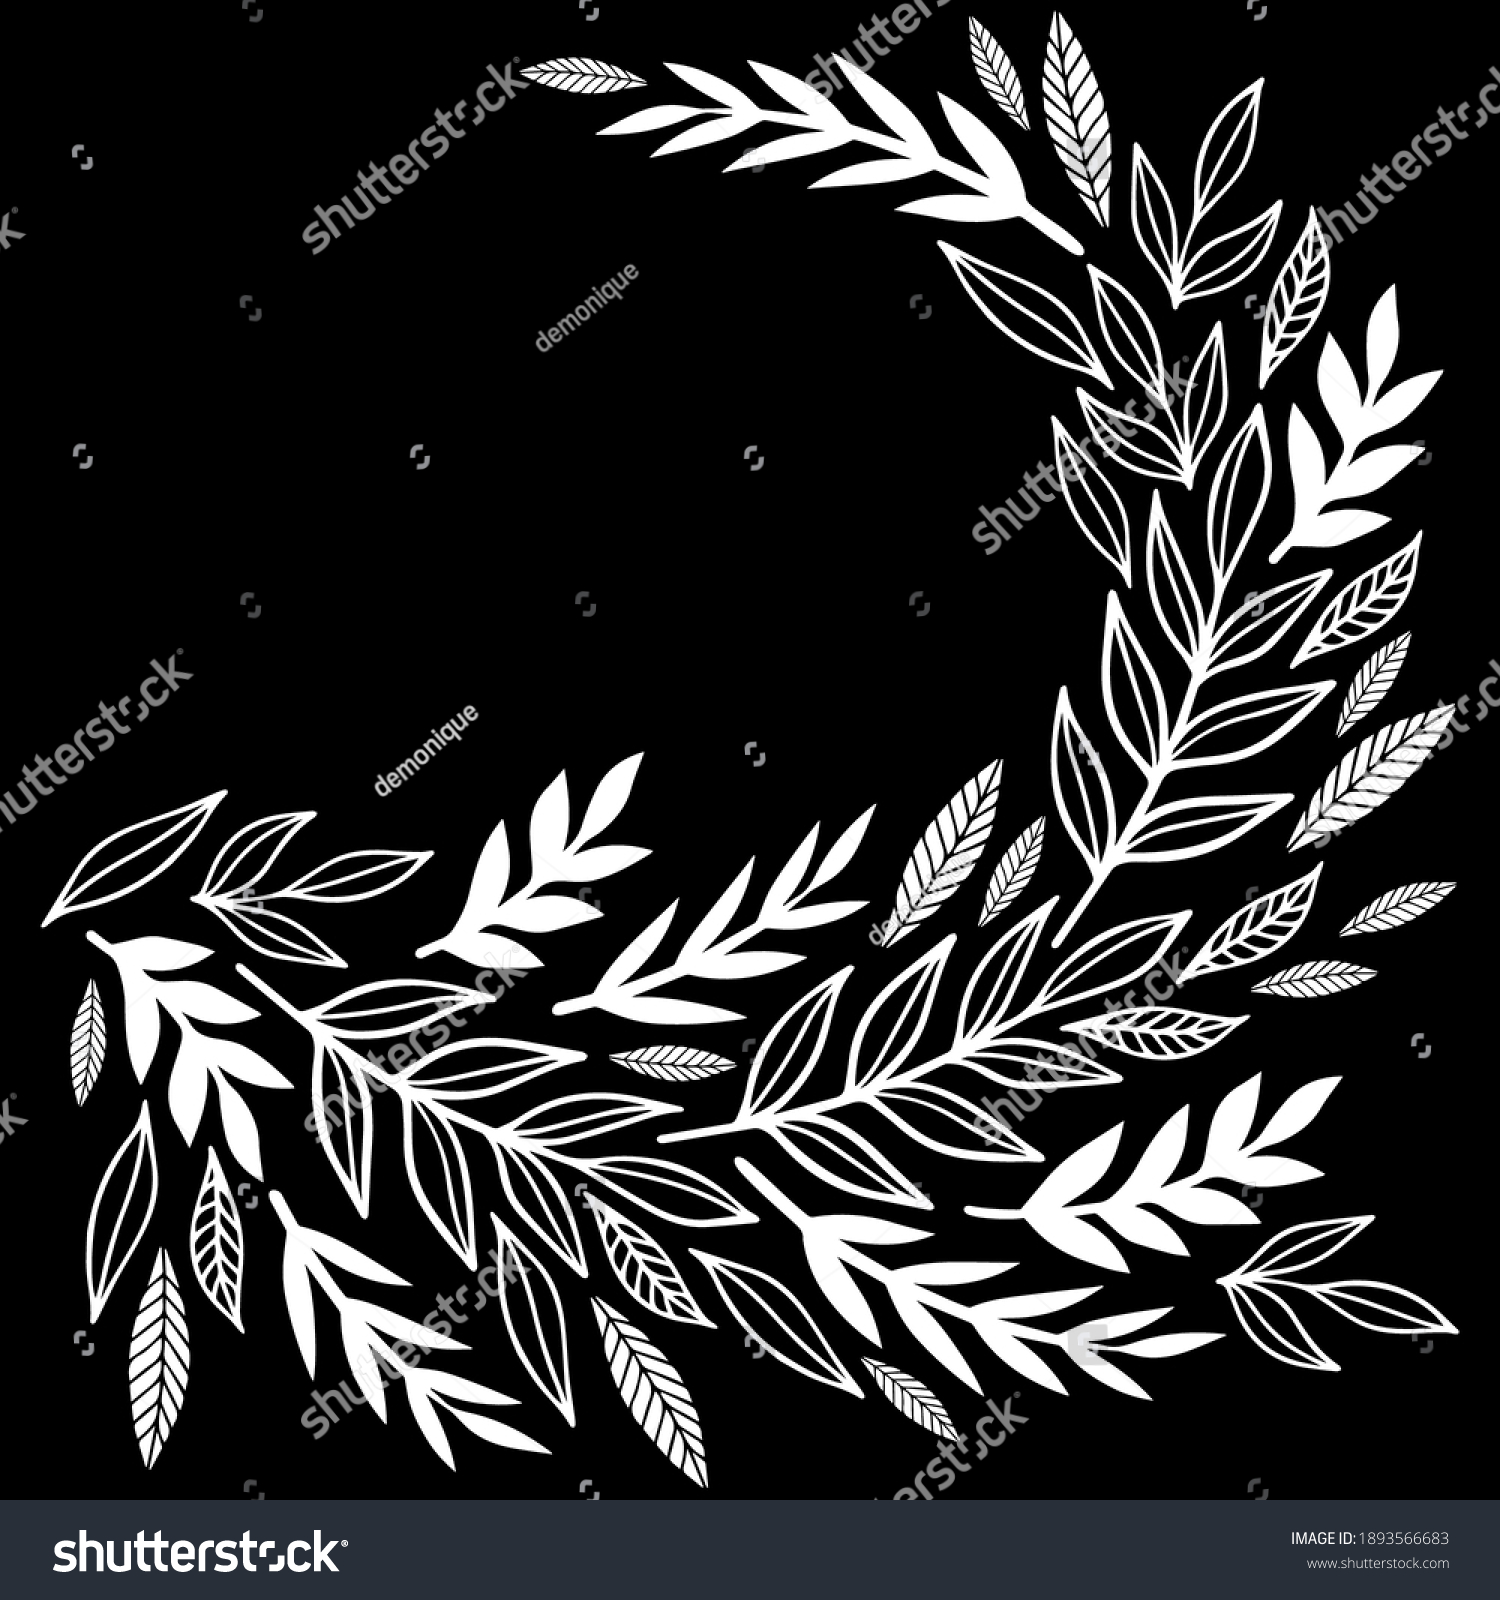 SVG of Monochrome messy linear leaves half wreath centerpiece. Decorative vector background with retro style flat botanical shapes on dark background. svg